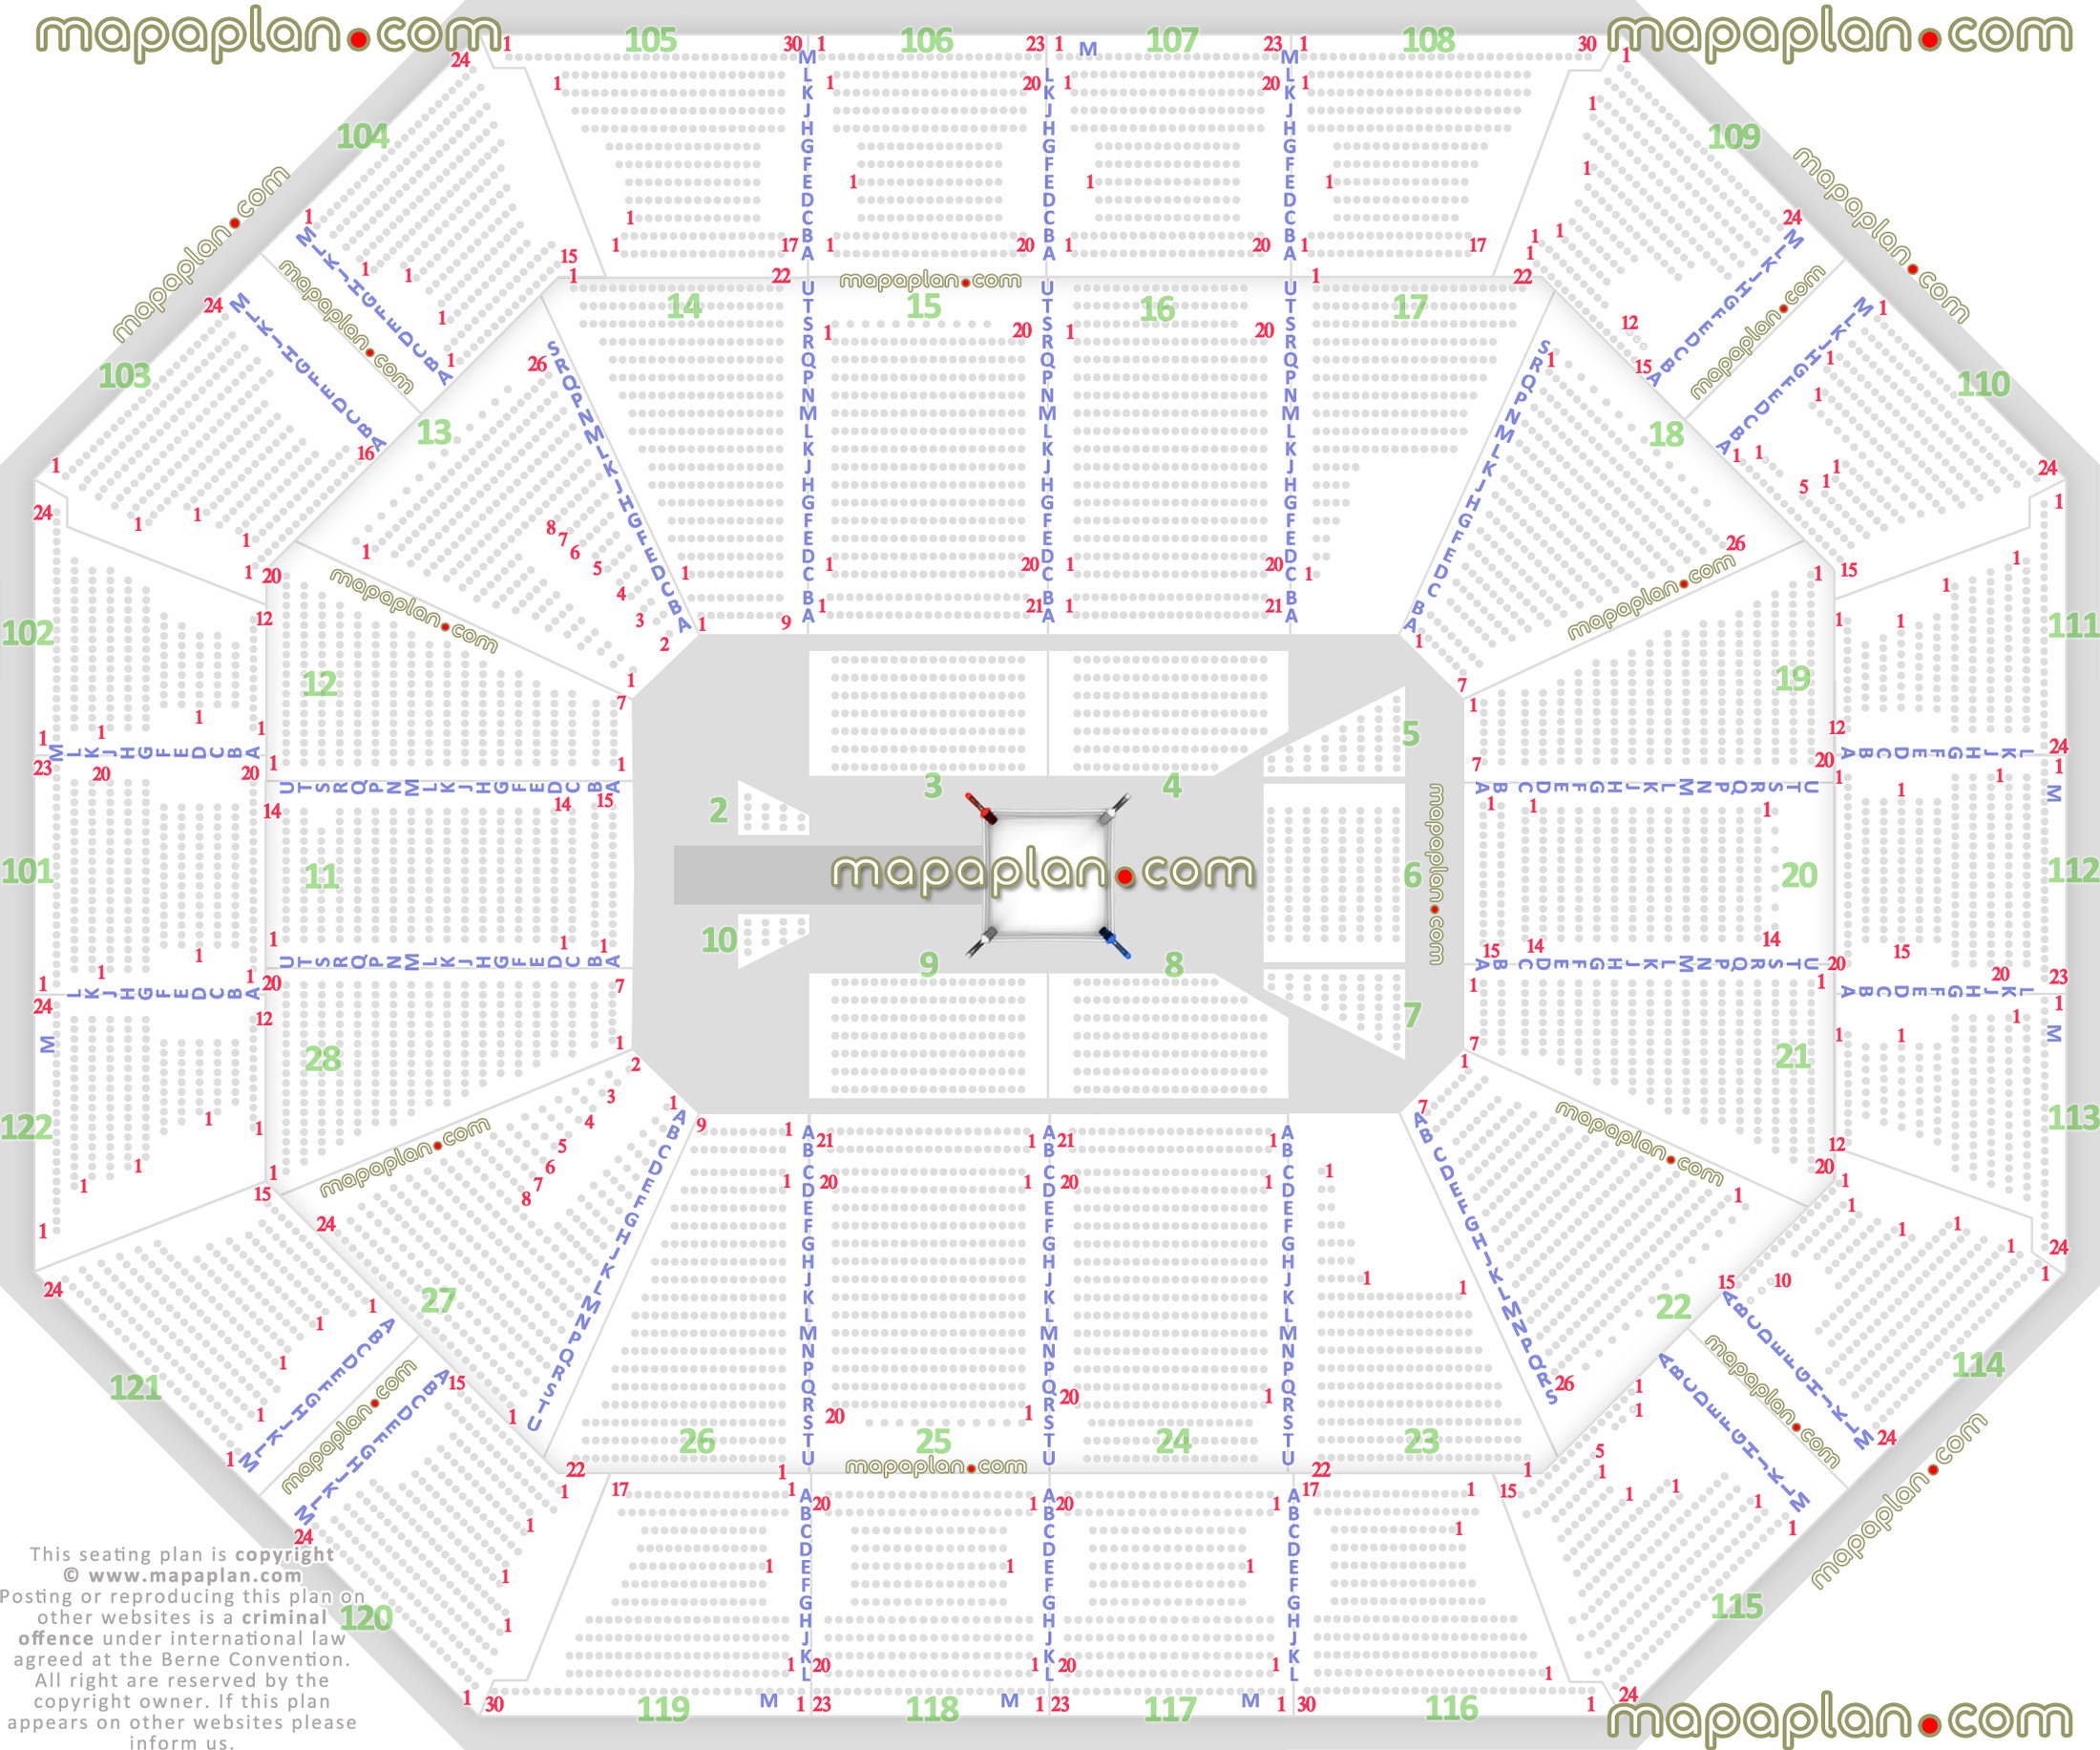 wwe raw smackdown live wrestling 360 round ring configuration best good bad worst partial obstructed view seats Uncasville Mohegan Sun Arena seating chart